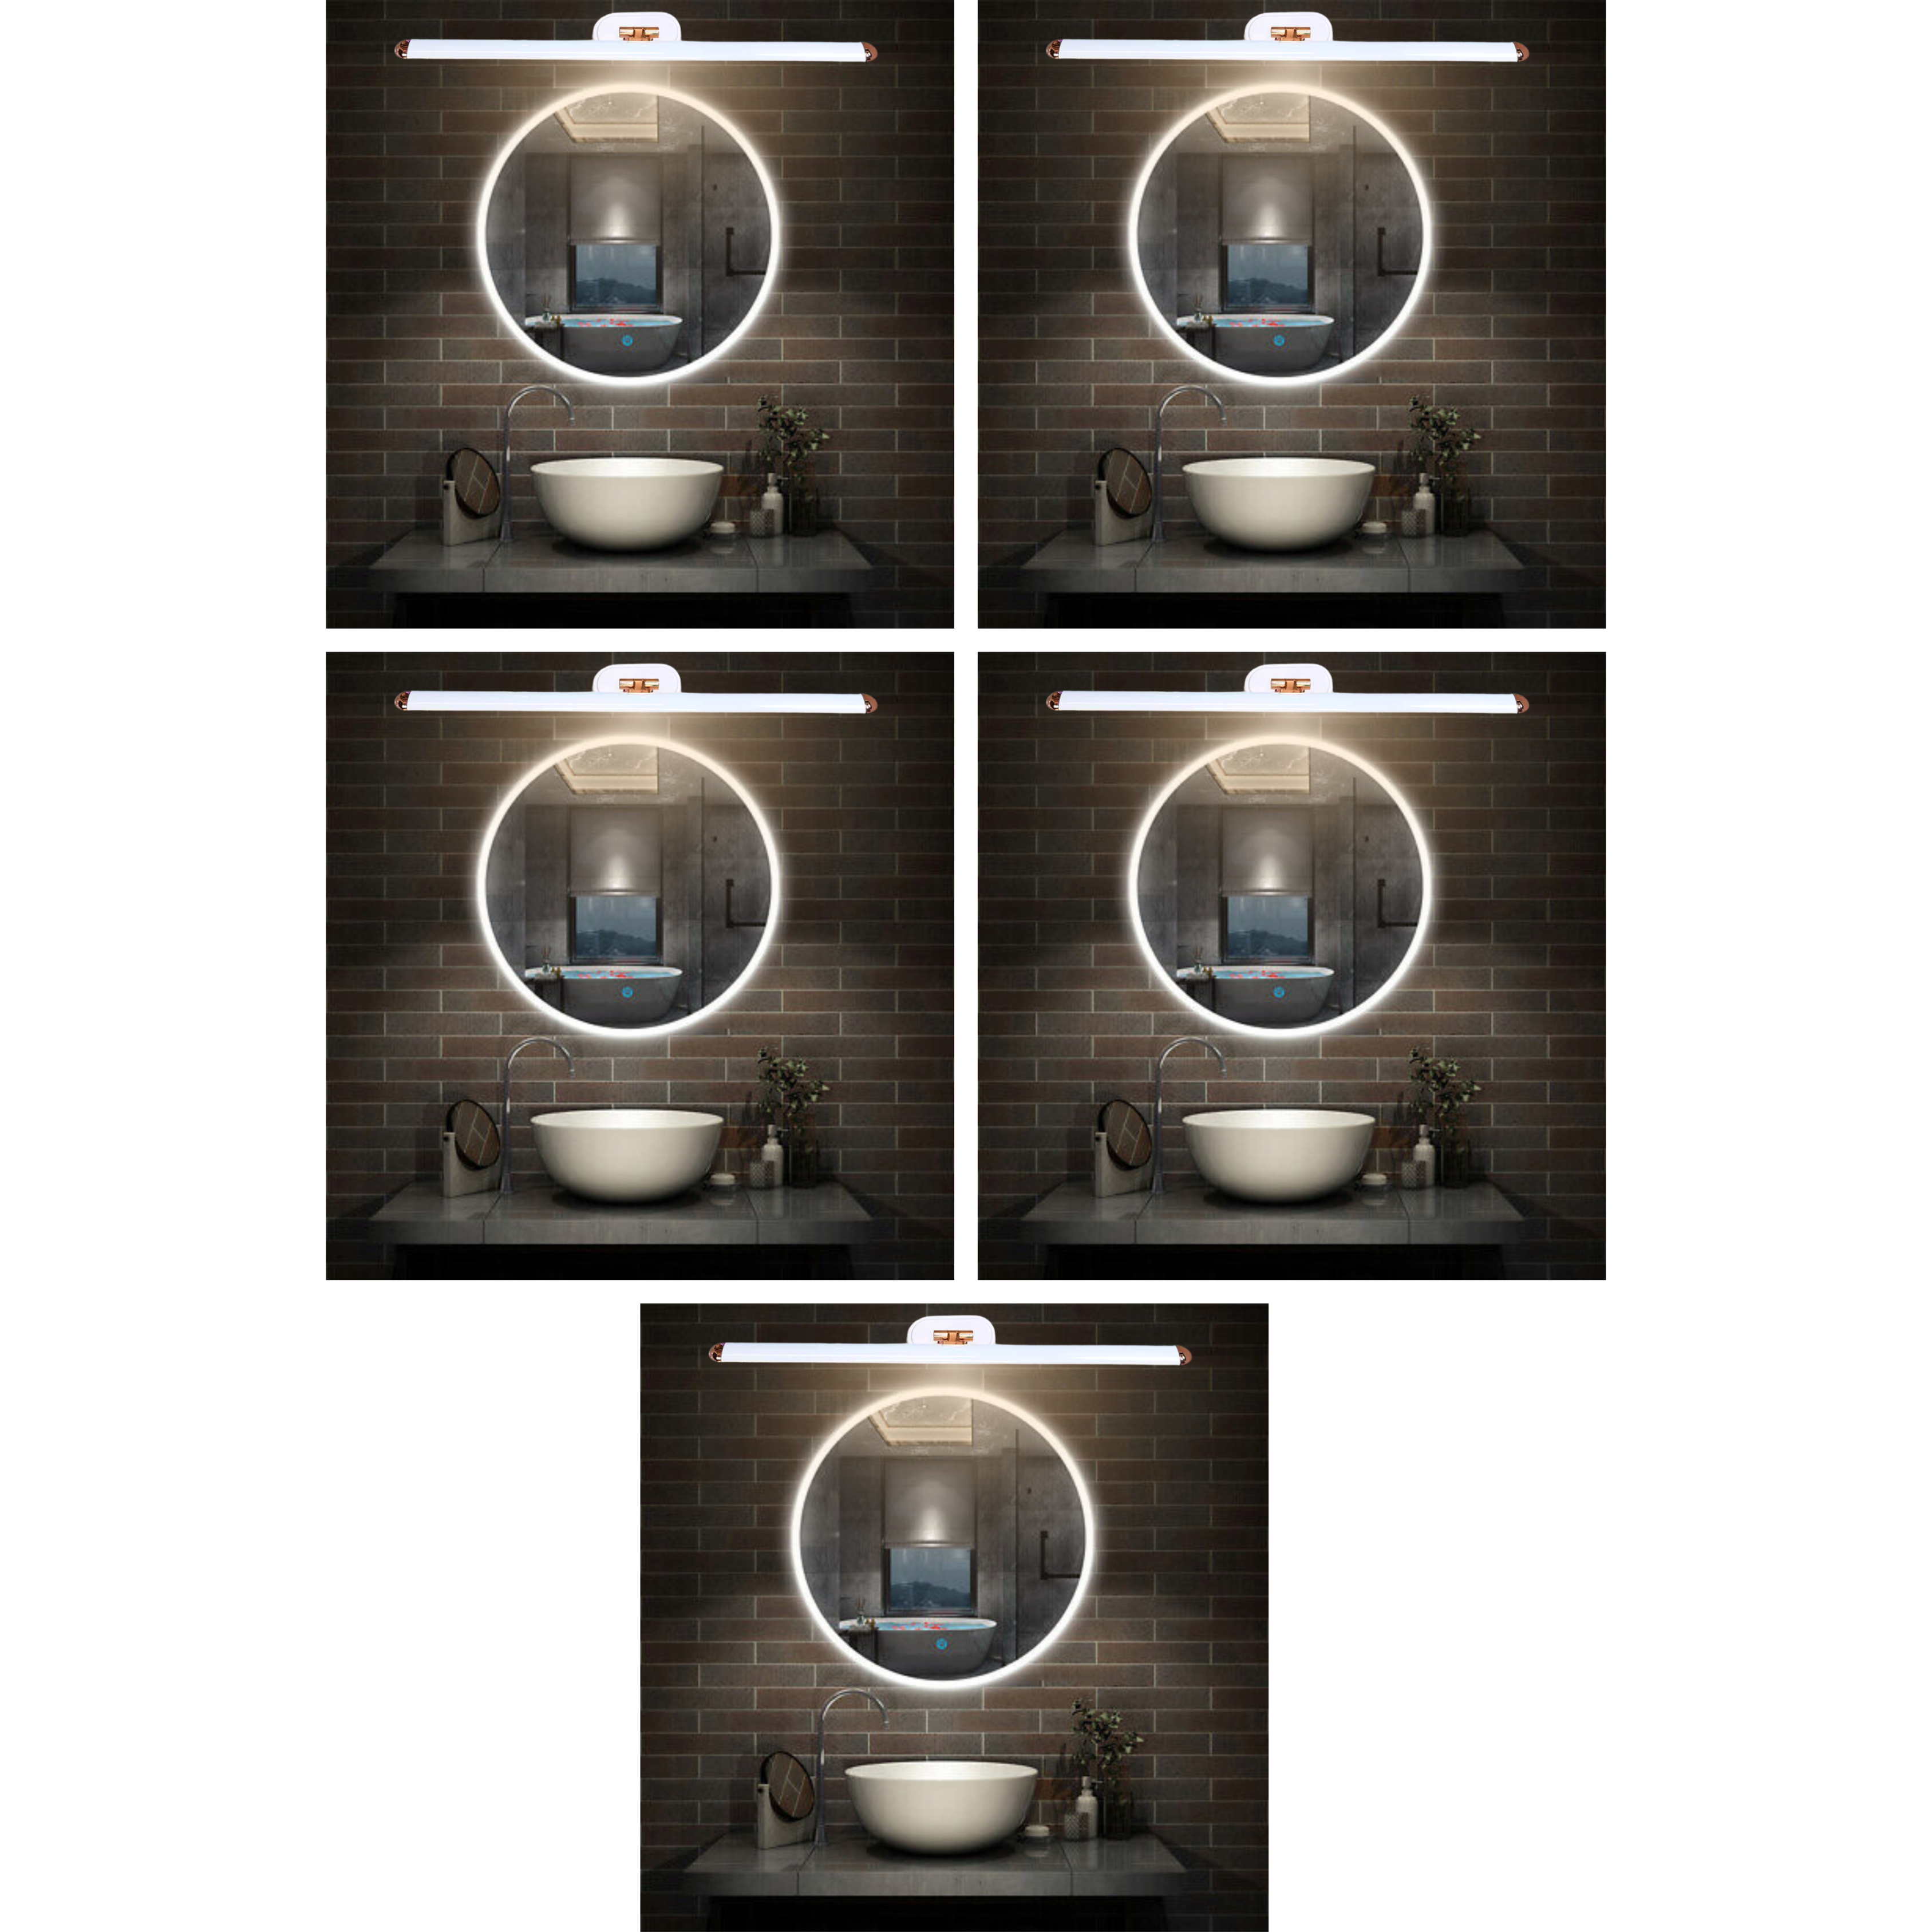 D'Mak 3in1 Color Changing LED Mirror Picture Wall Light, White Body Bathroom Vanity Led Mirror Light